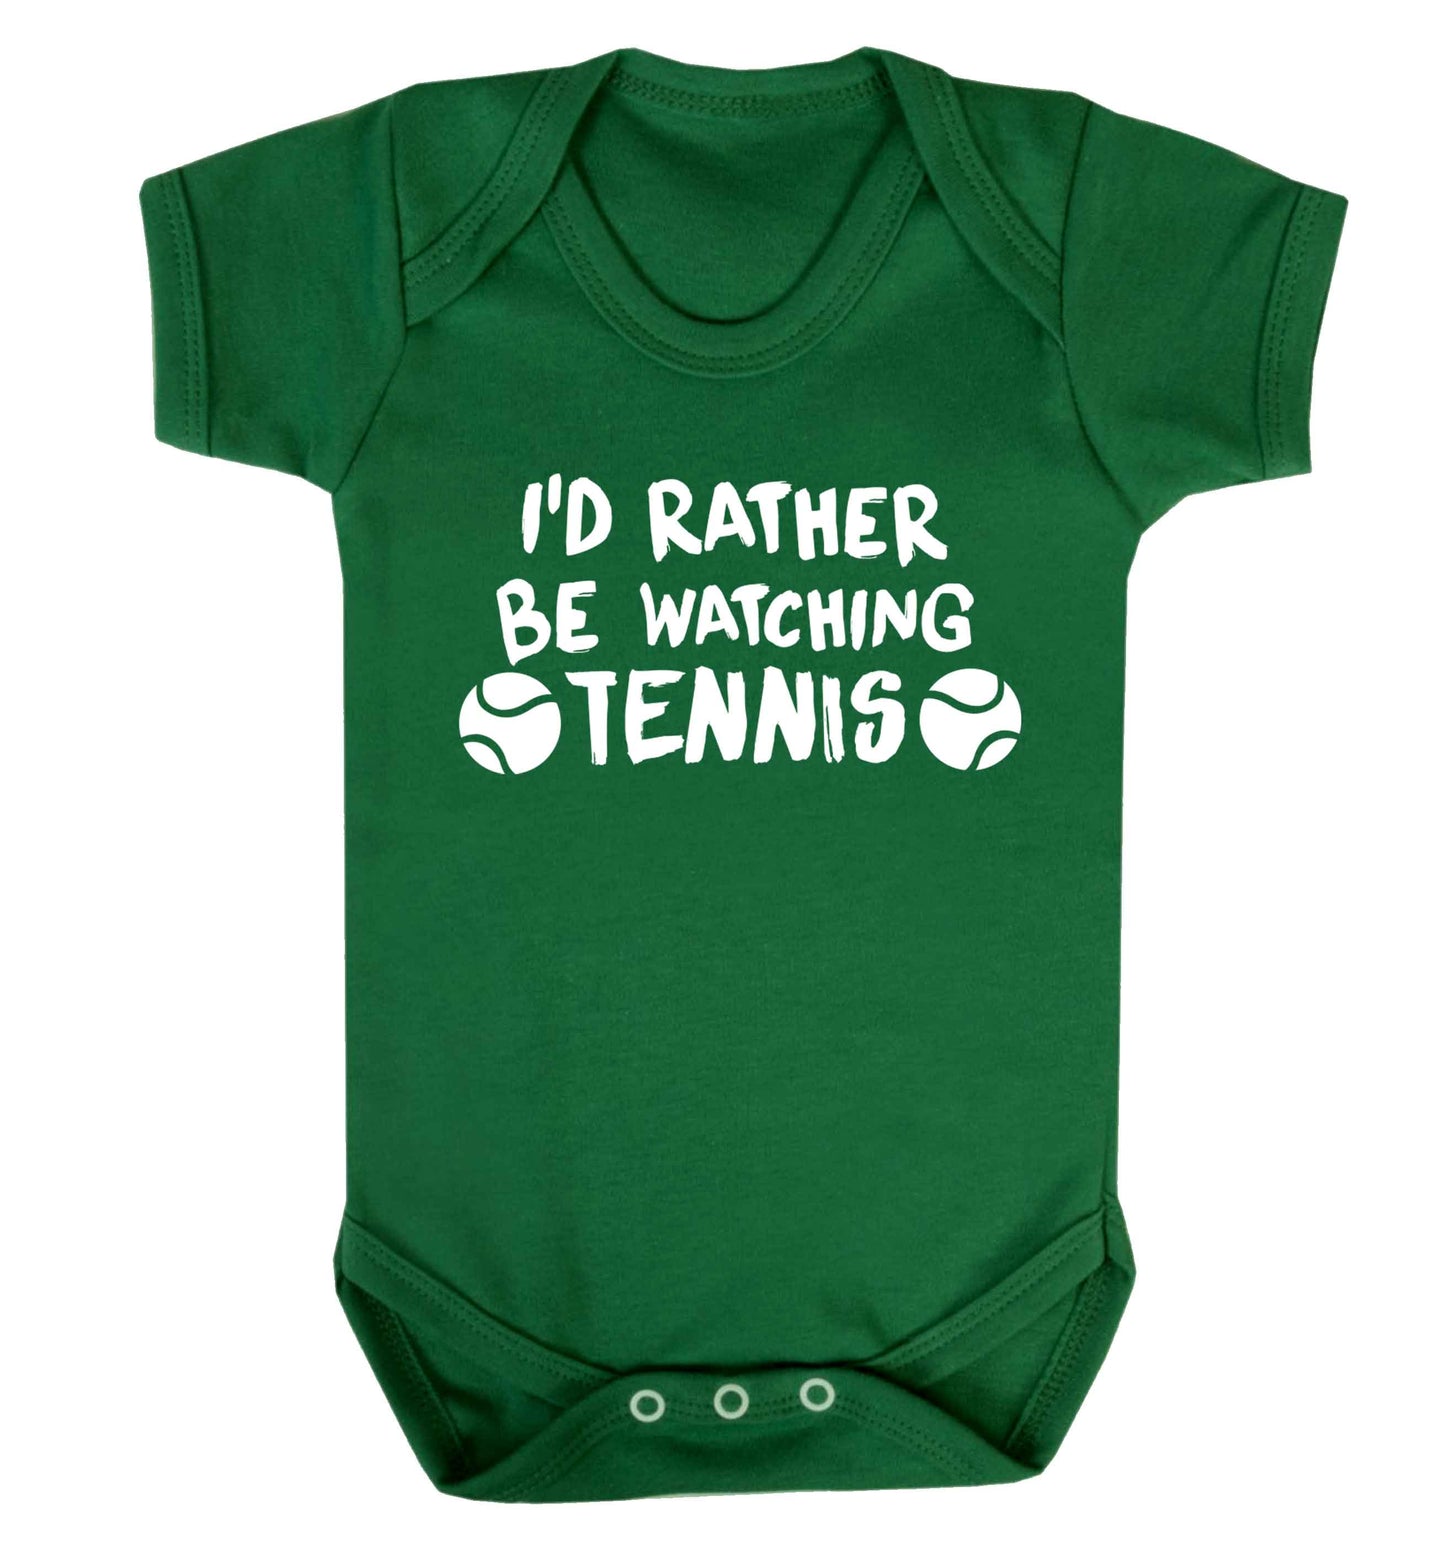 I'd rather be watching the tennis Baby Vest green 18-24 months